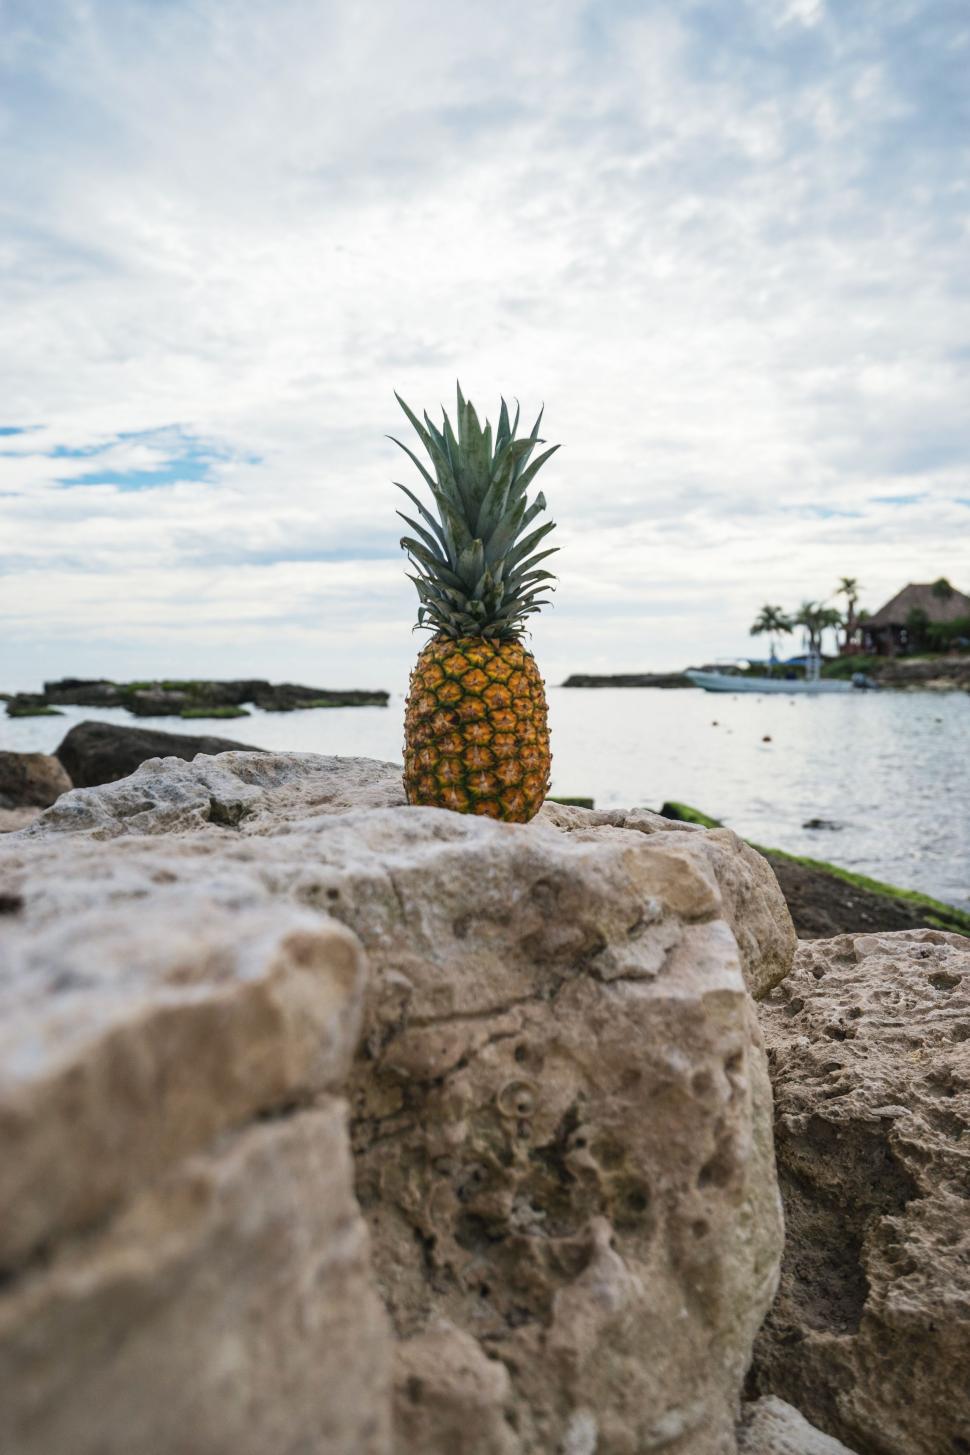 Free Image of A Pineapple on a Rock by Water 